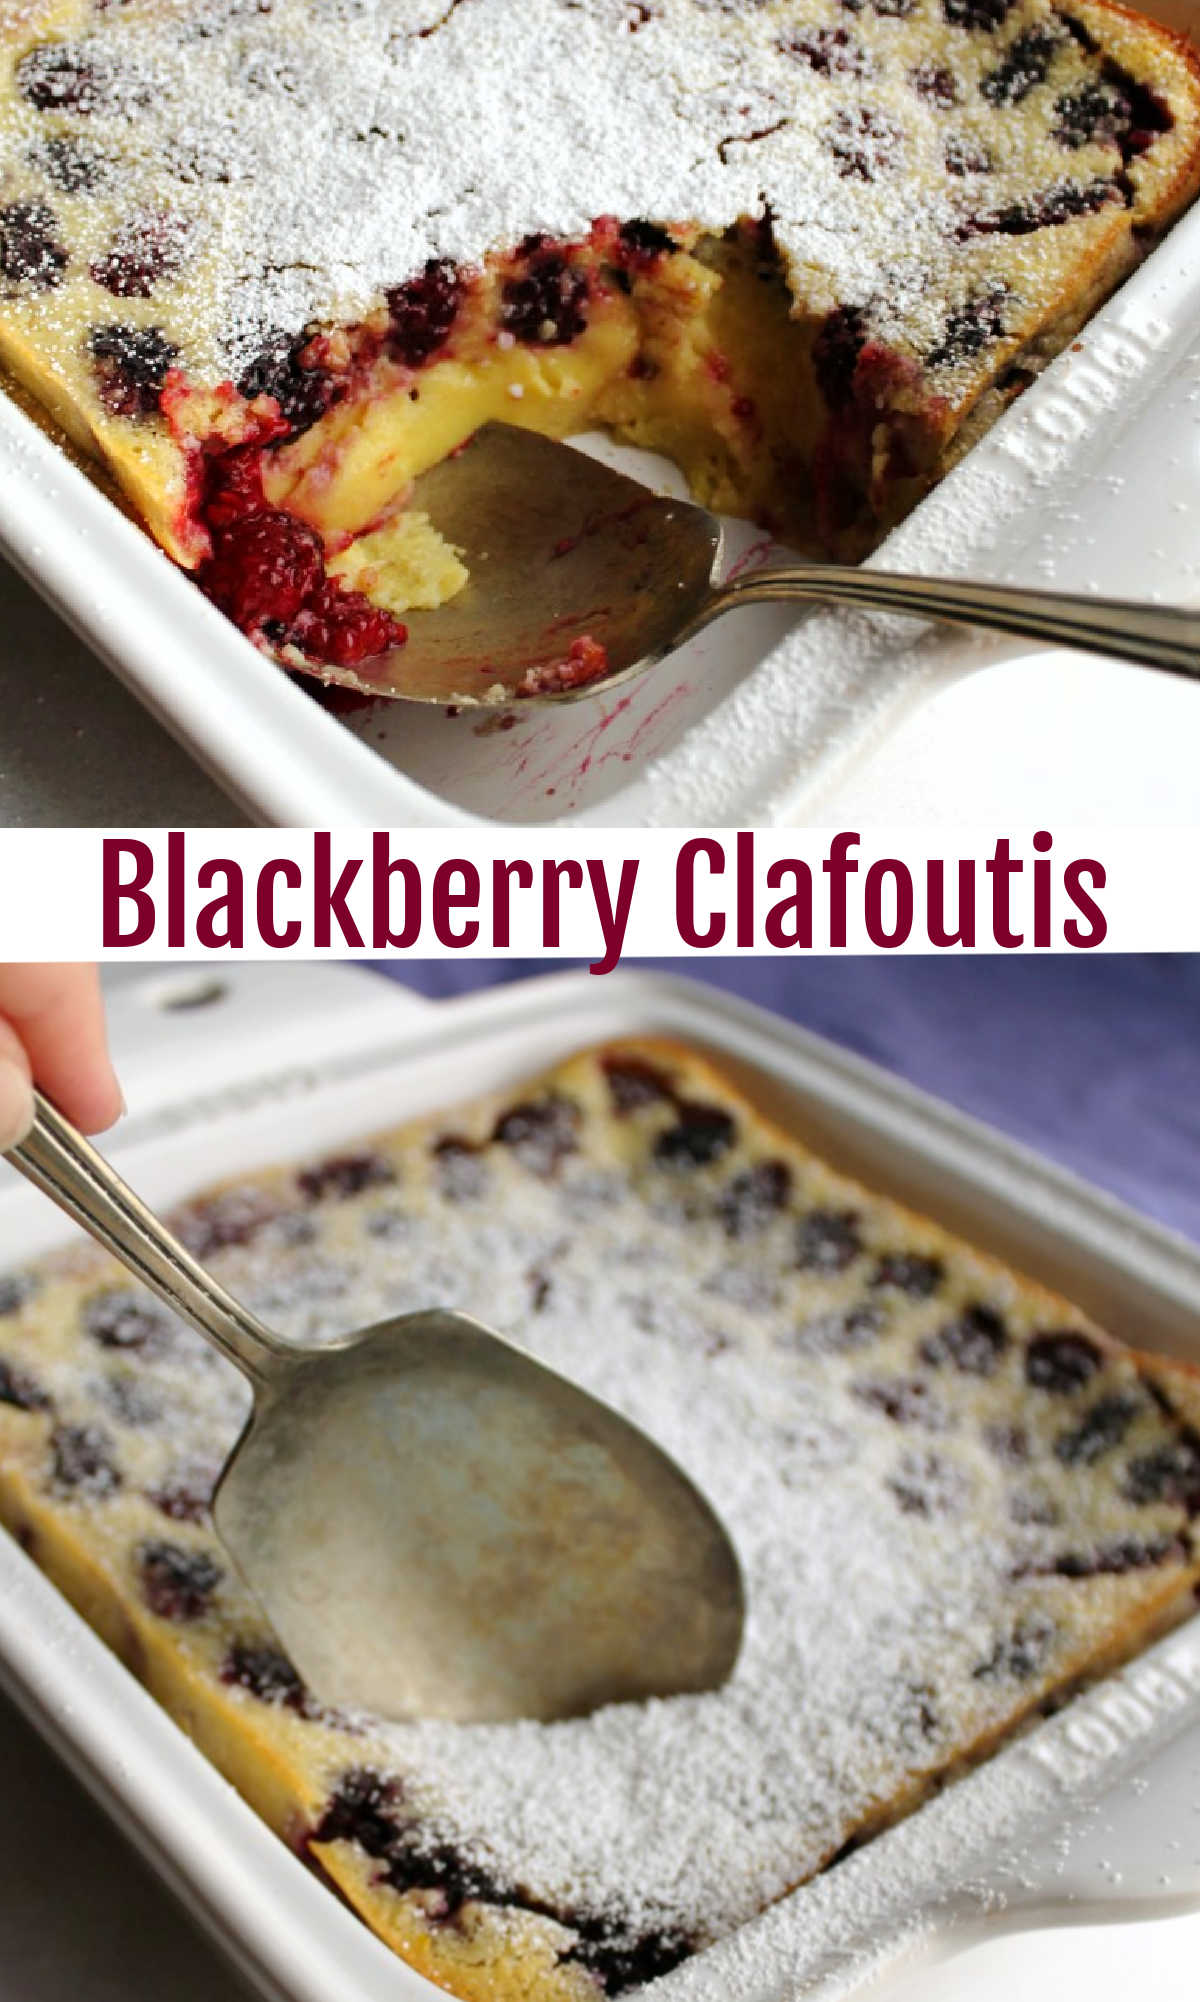 Have you ever tried clafoutis? To me it is like a cross between a custard and a dutch baby pancake. I swapped the usual cherries for blackberries and added a bit of lemon zest for brightness. The result would be a perfect brunch treat with a cup of coffee!